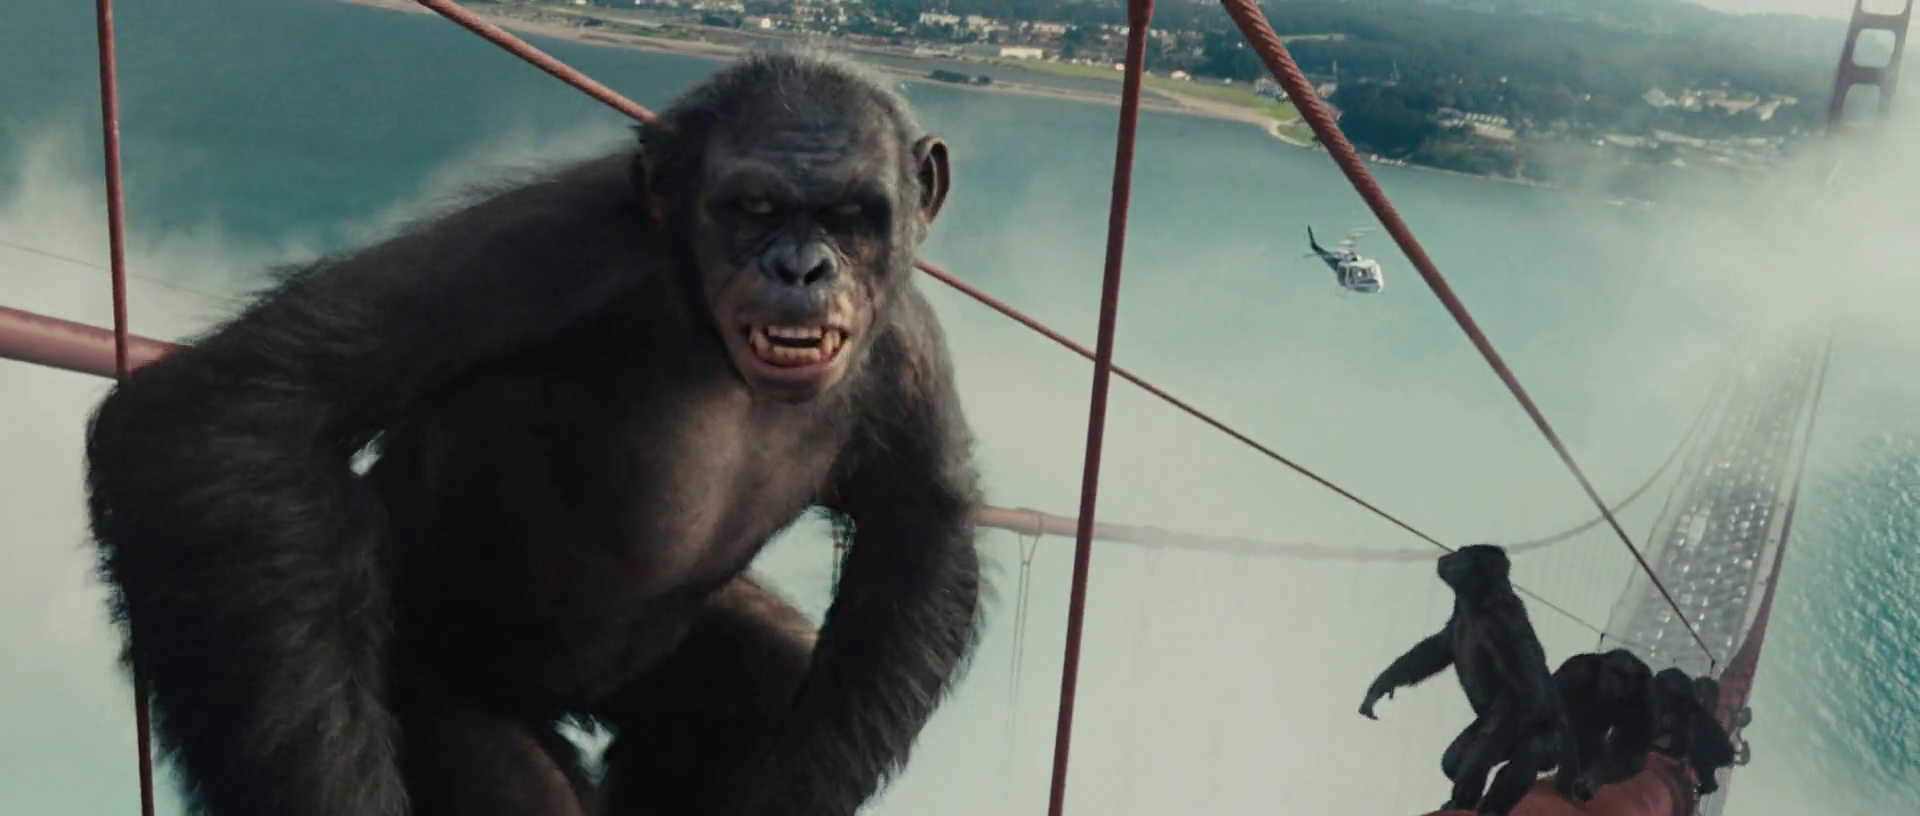 Download Rise of the Planet of the Apes (2011)-Andy Serkis-1080p-H264